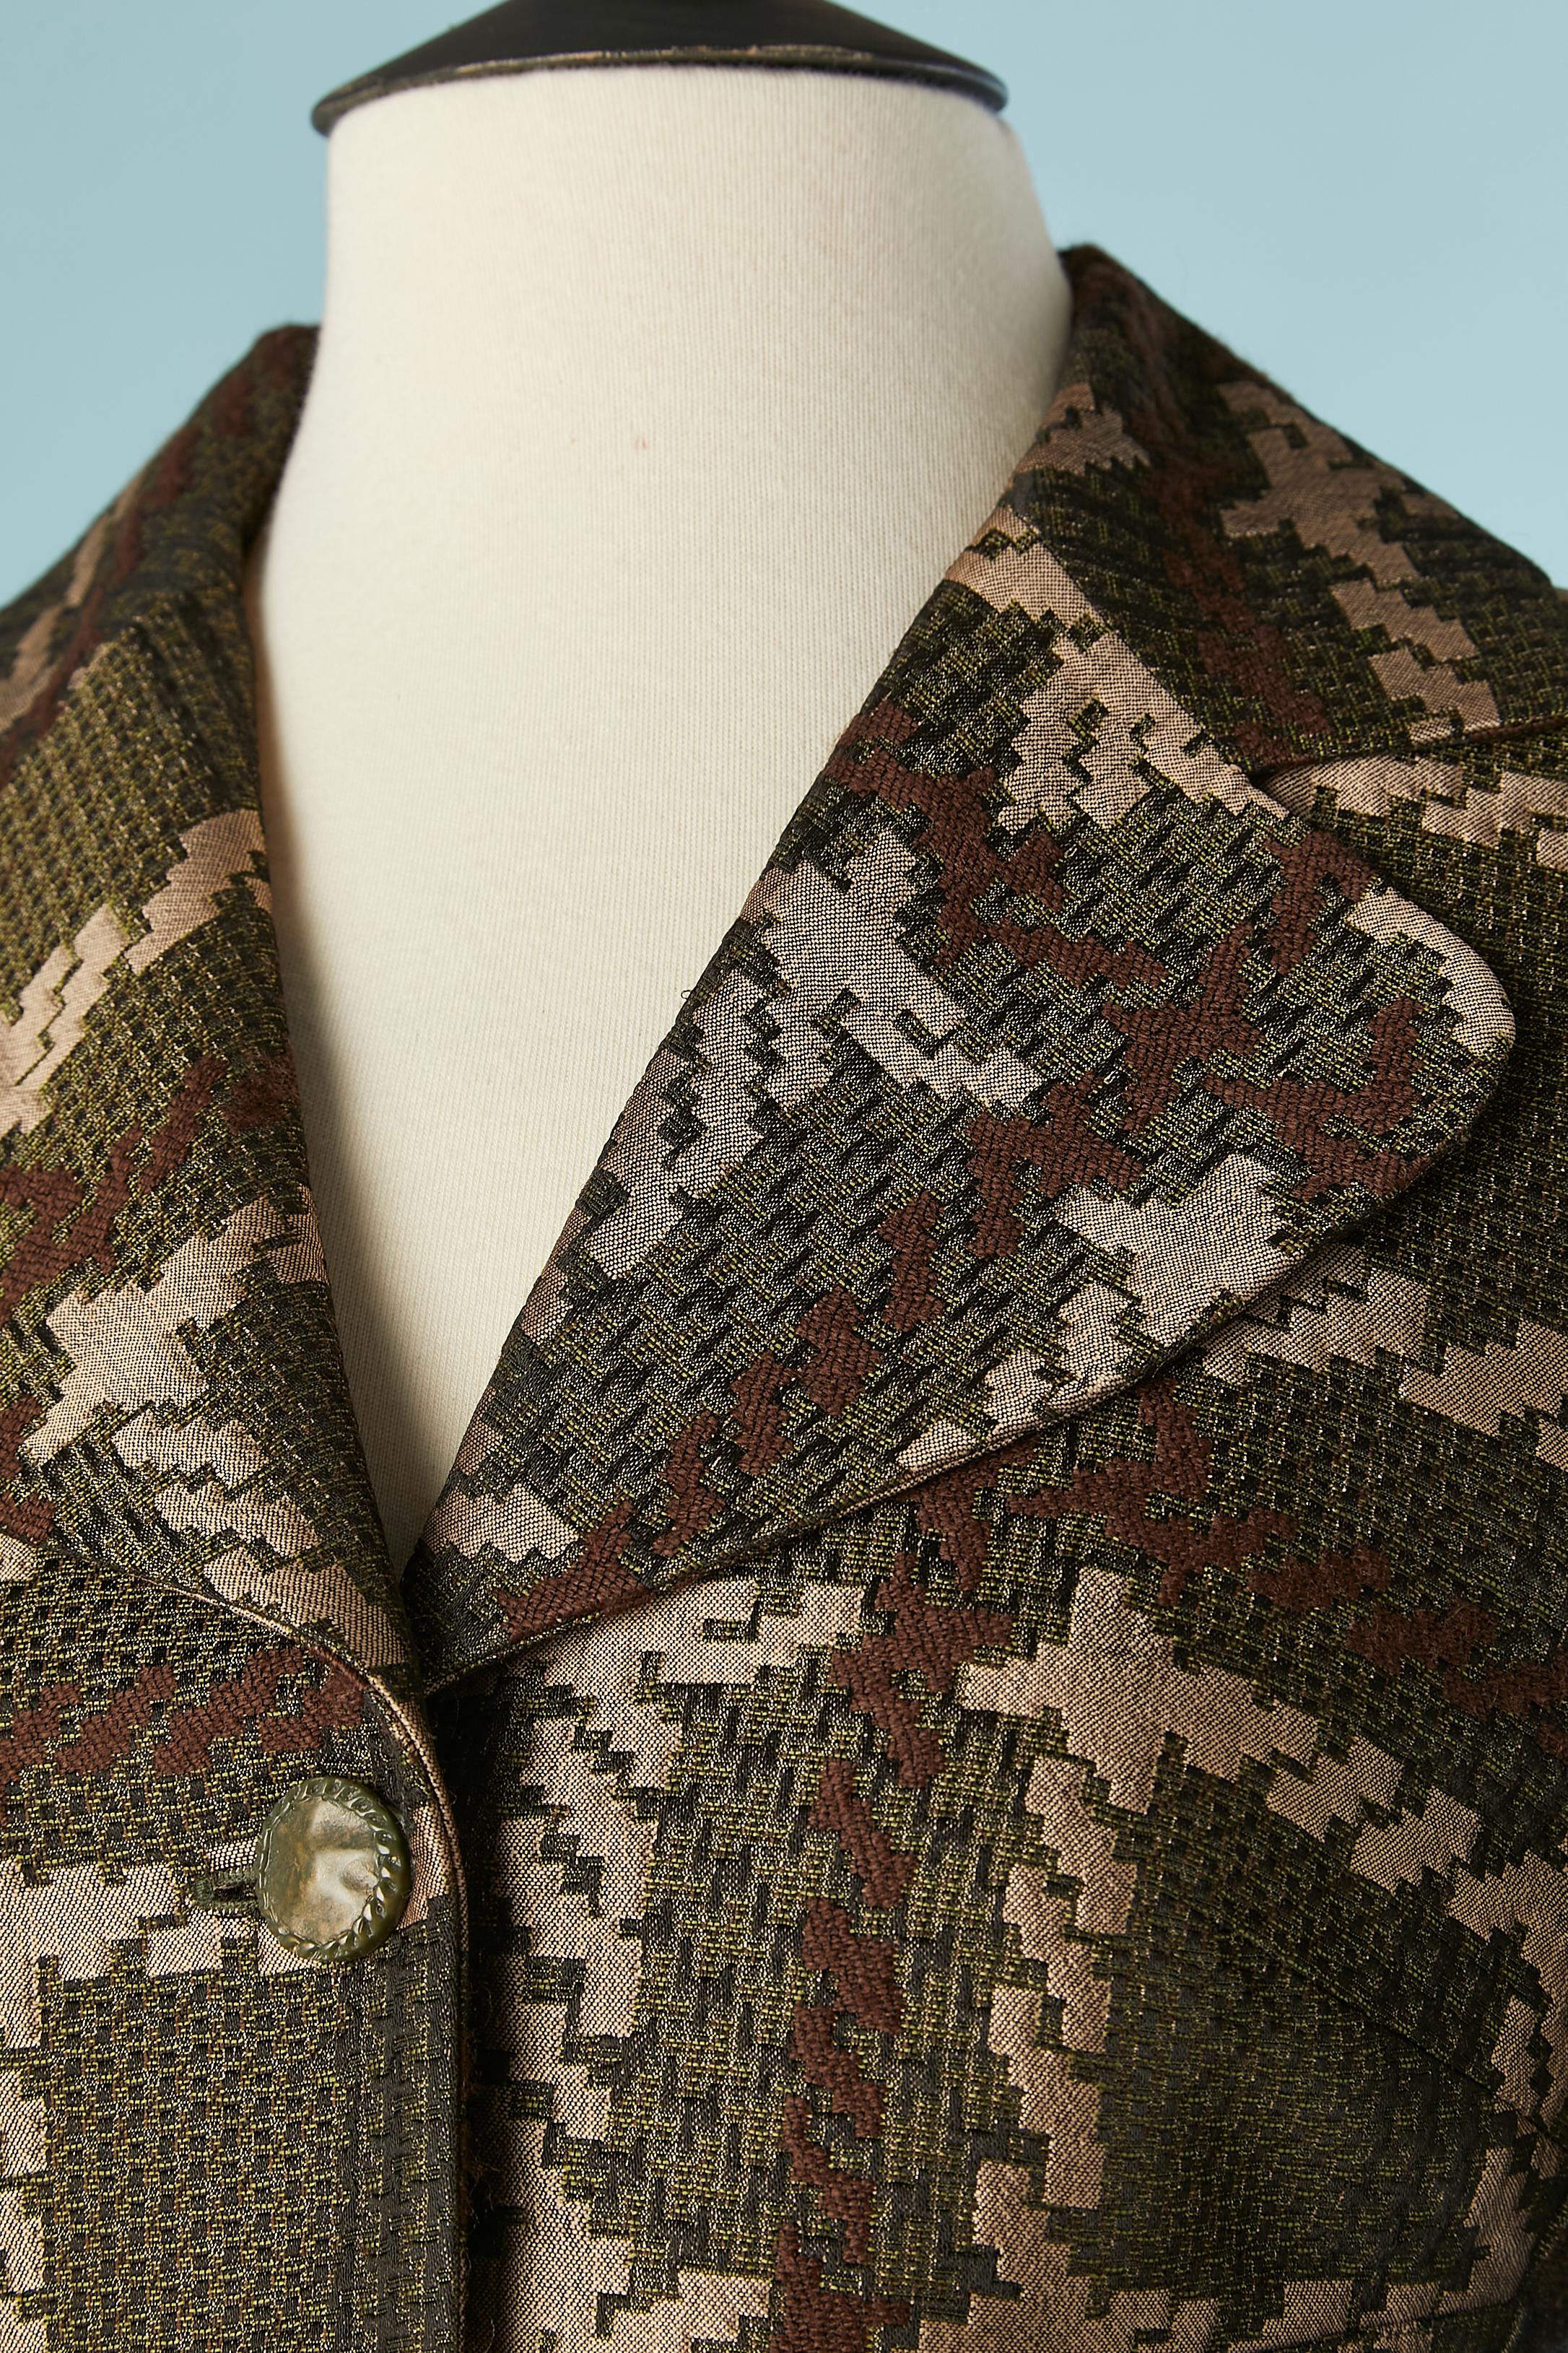 Single-breasted brown and kaki jacquard jacket. Main fabric composition: 37% acetate, 23% polyester, 20% wool, 20% acrylic. Lining ( printed) : 54% acetate, 46% rayon. 
SIZE 38 (FR) 8 (US) M 